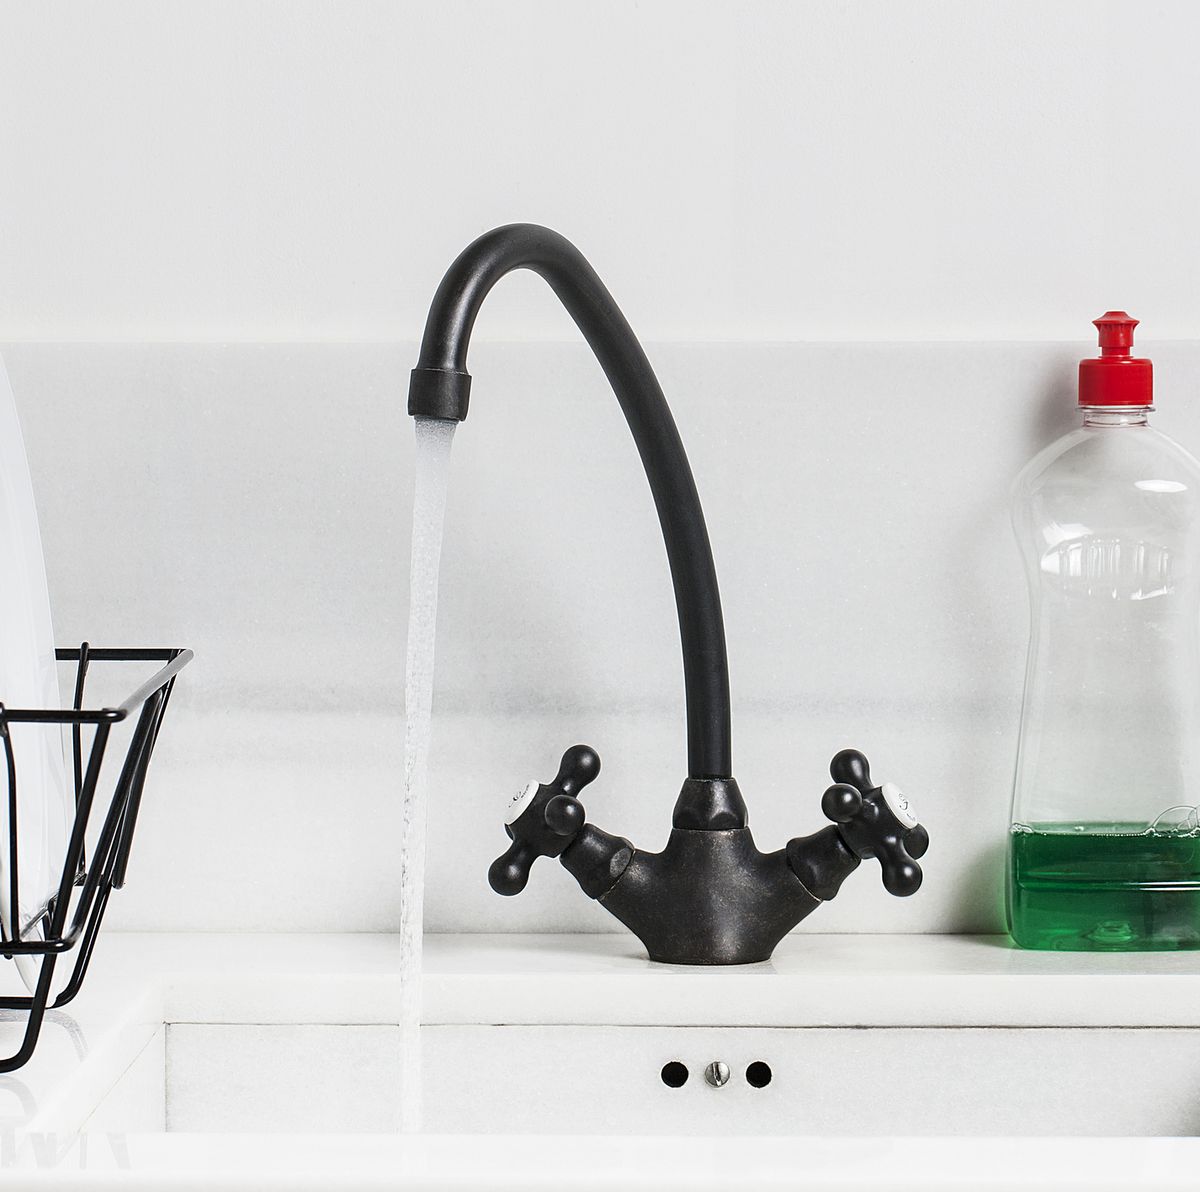 How to Clean a Kitchen Sink of Any Type: 5 Steps to Deep-Clean